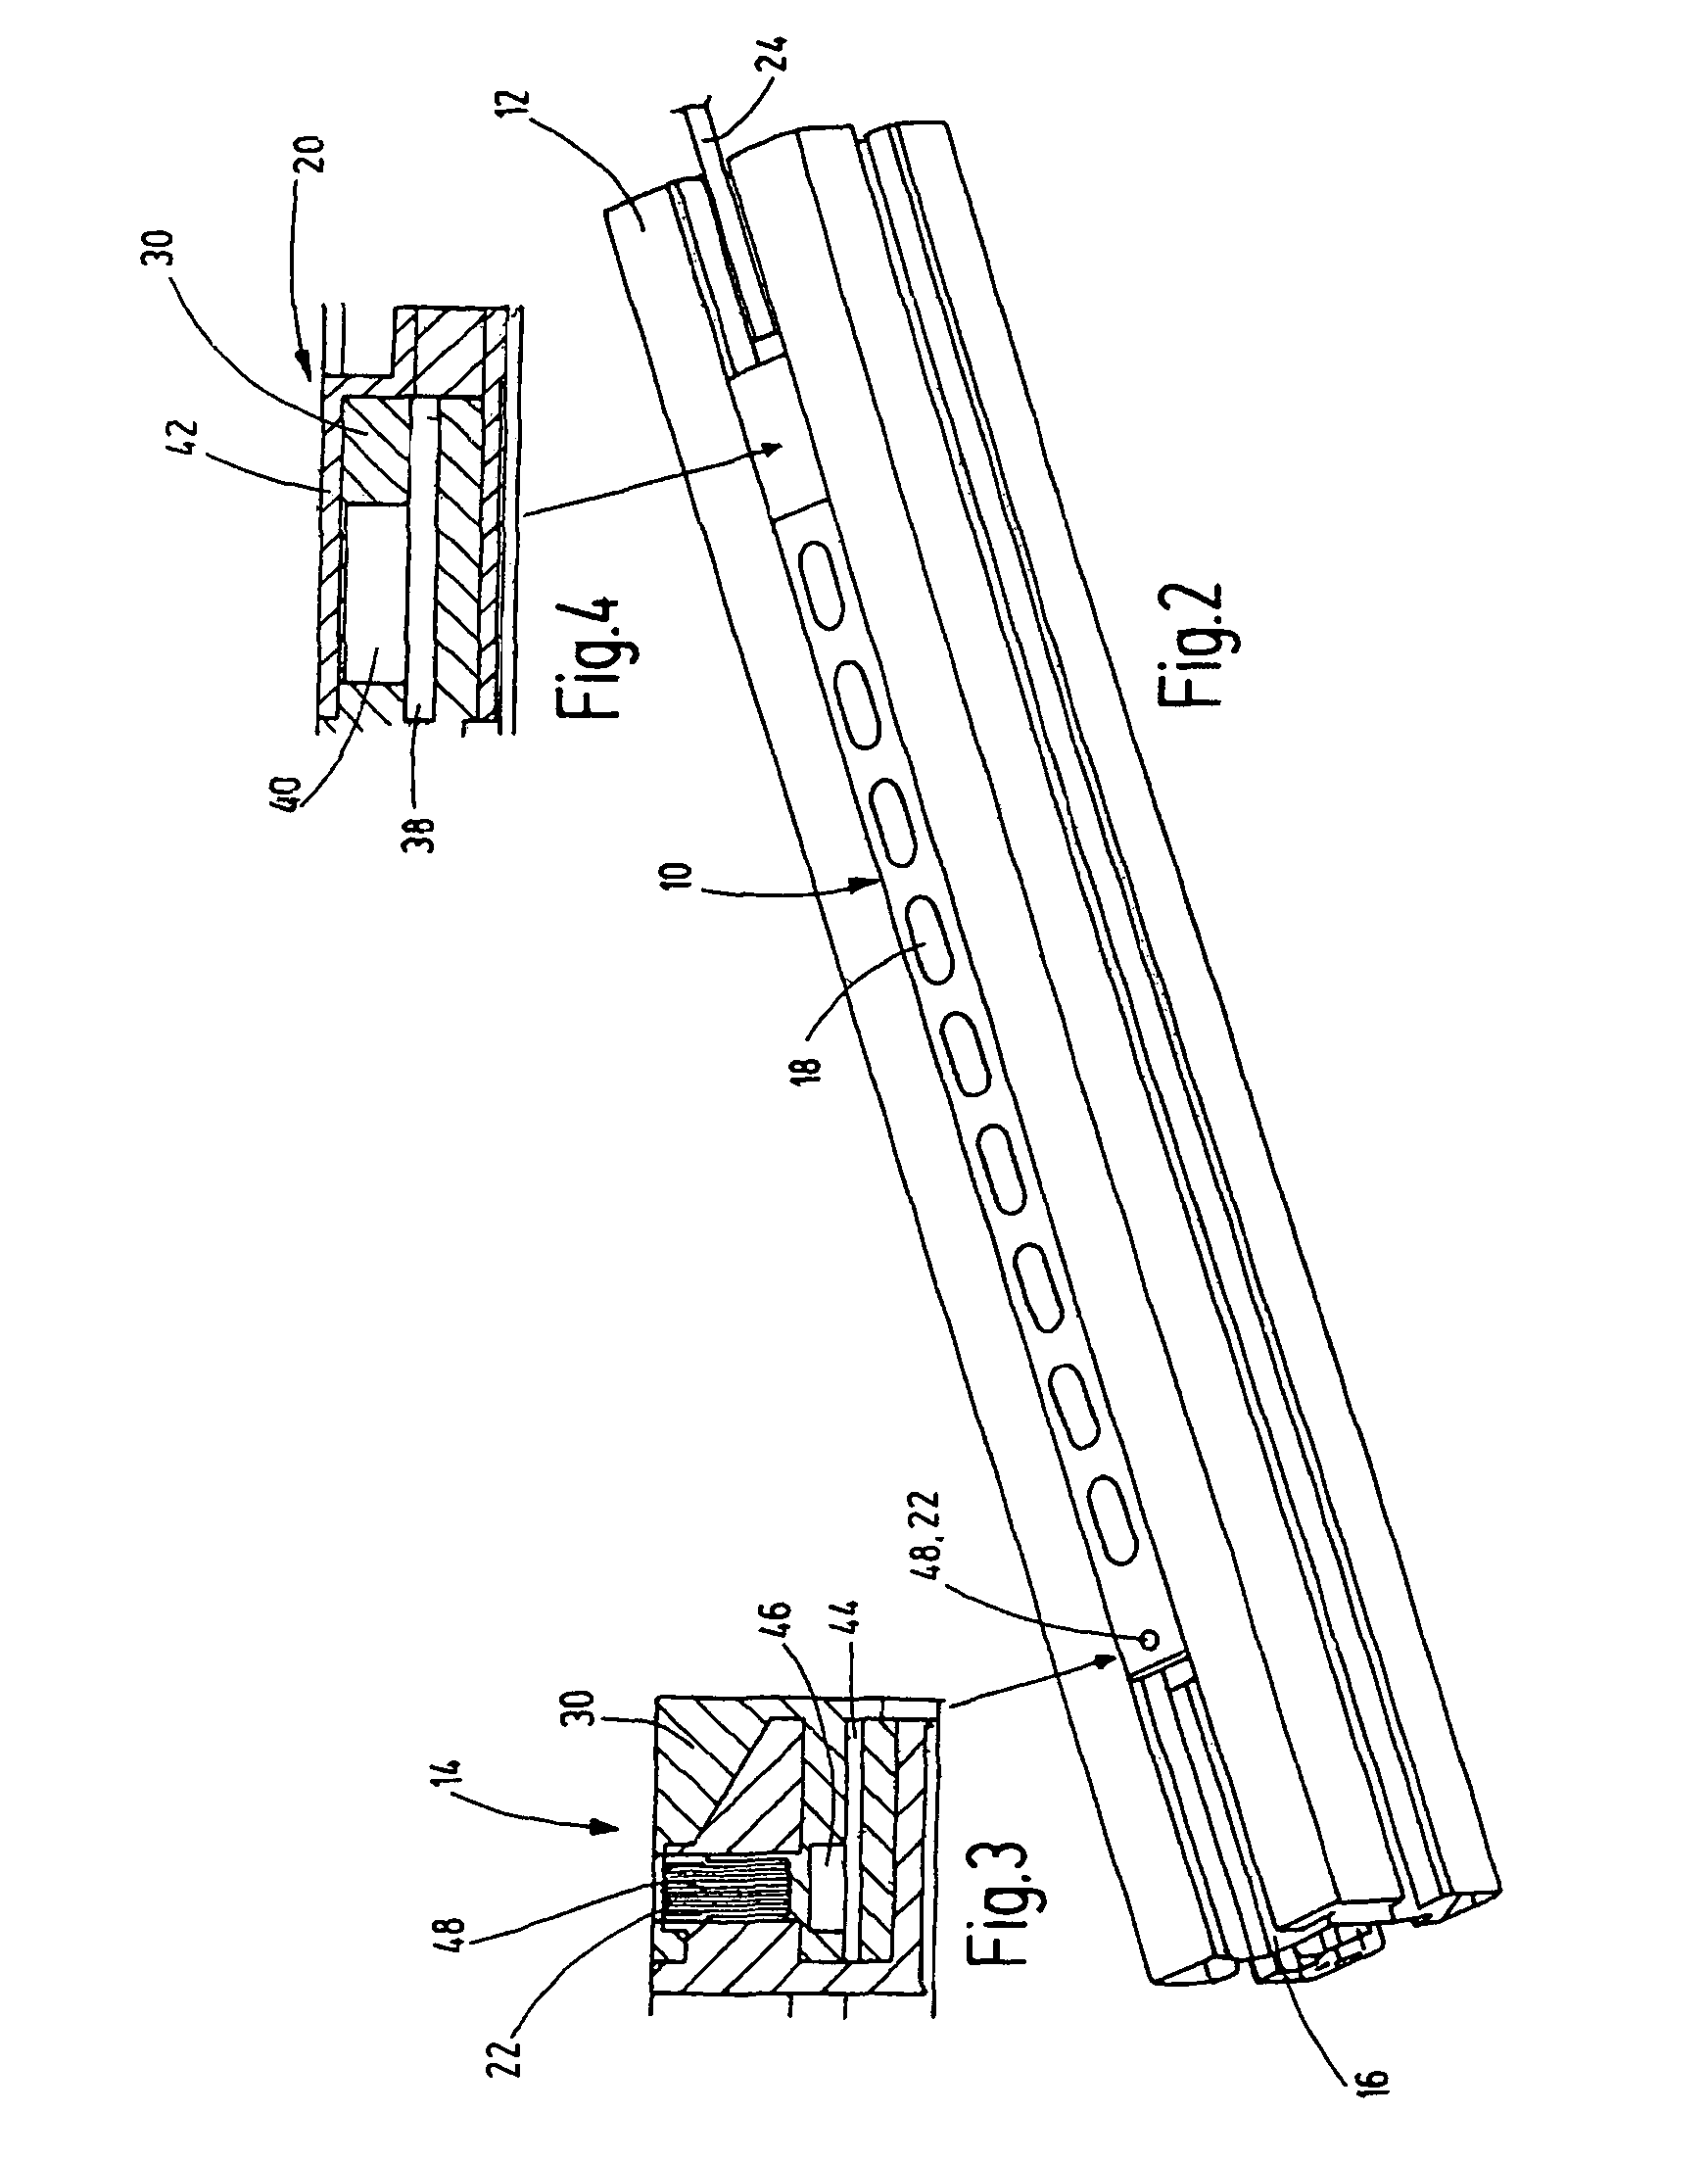 Device for monitoring the state of a system